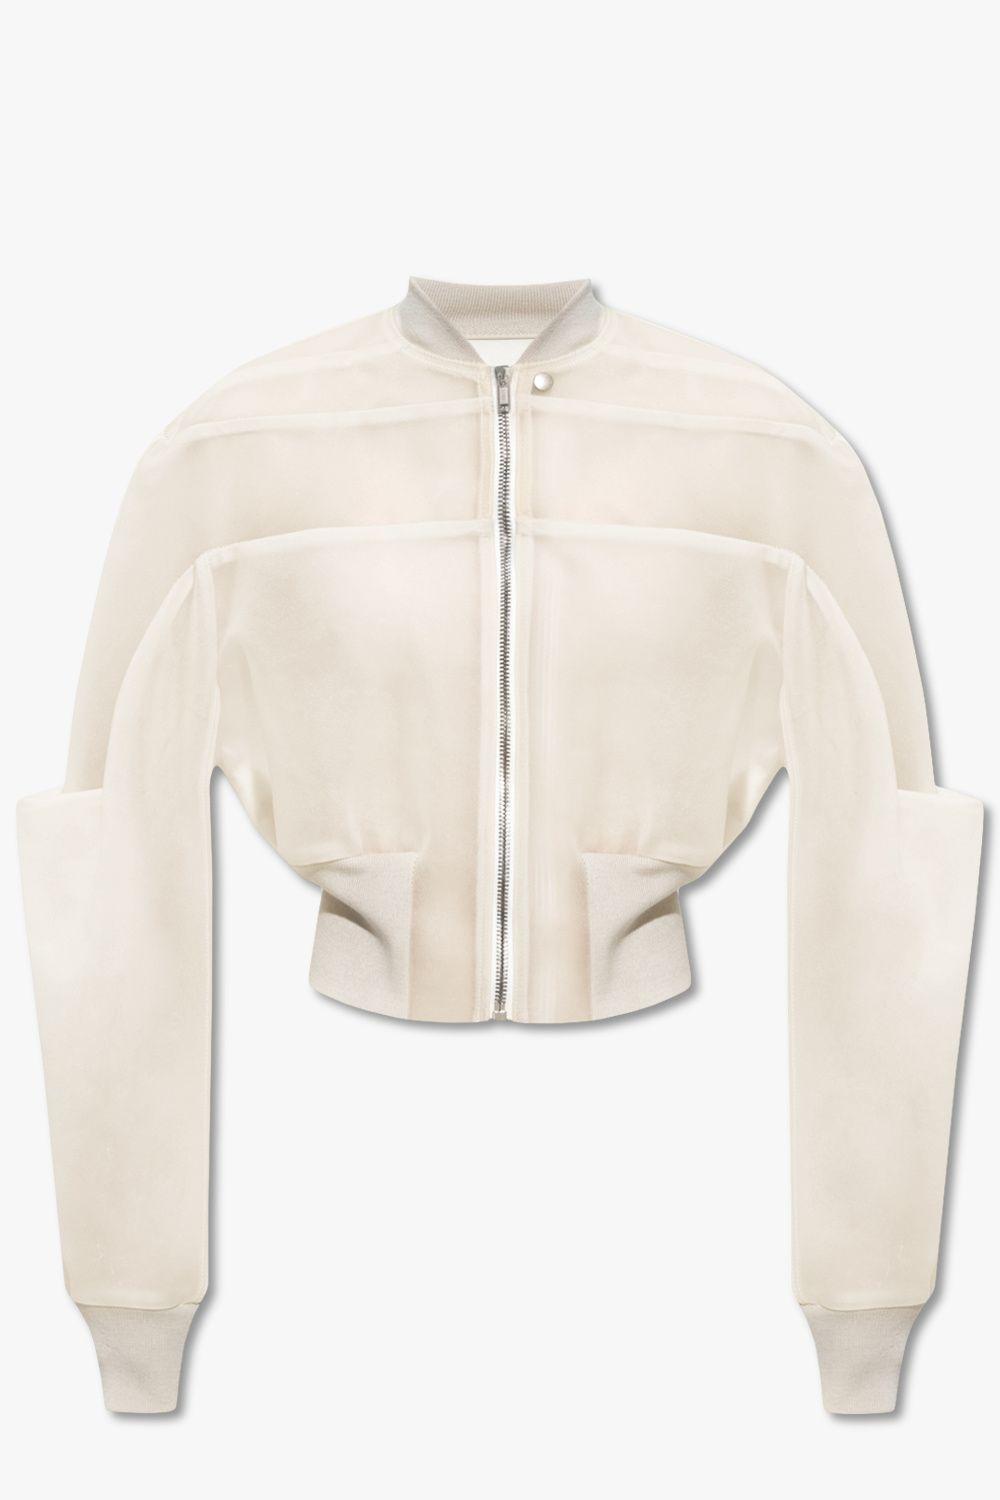 Rick Owens Leather Bomber Jacket in White | Lyst